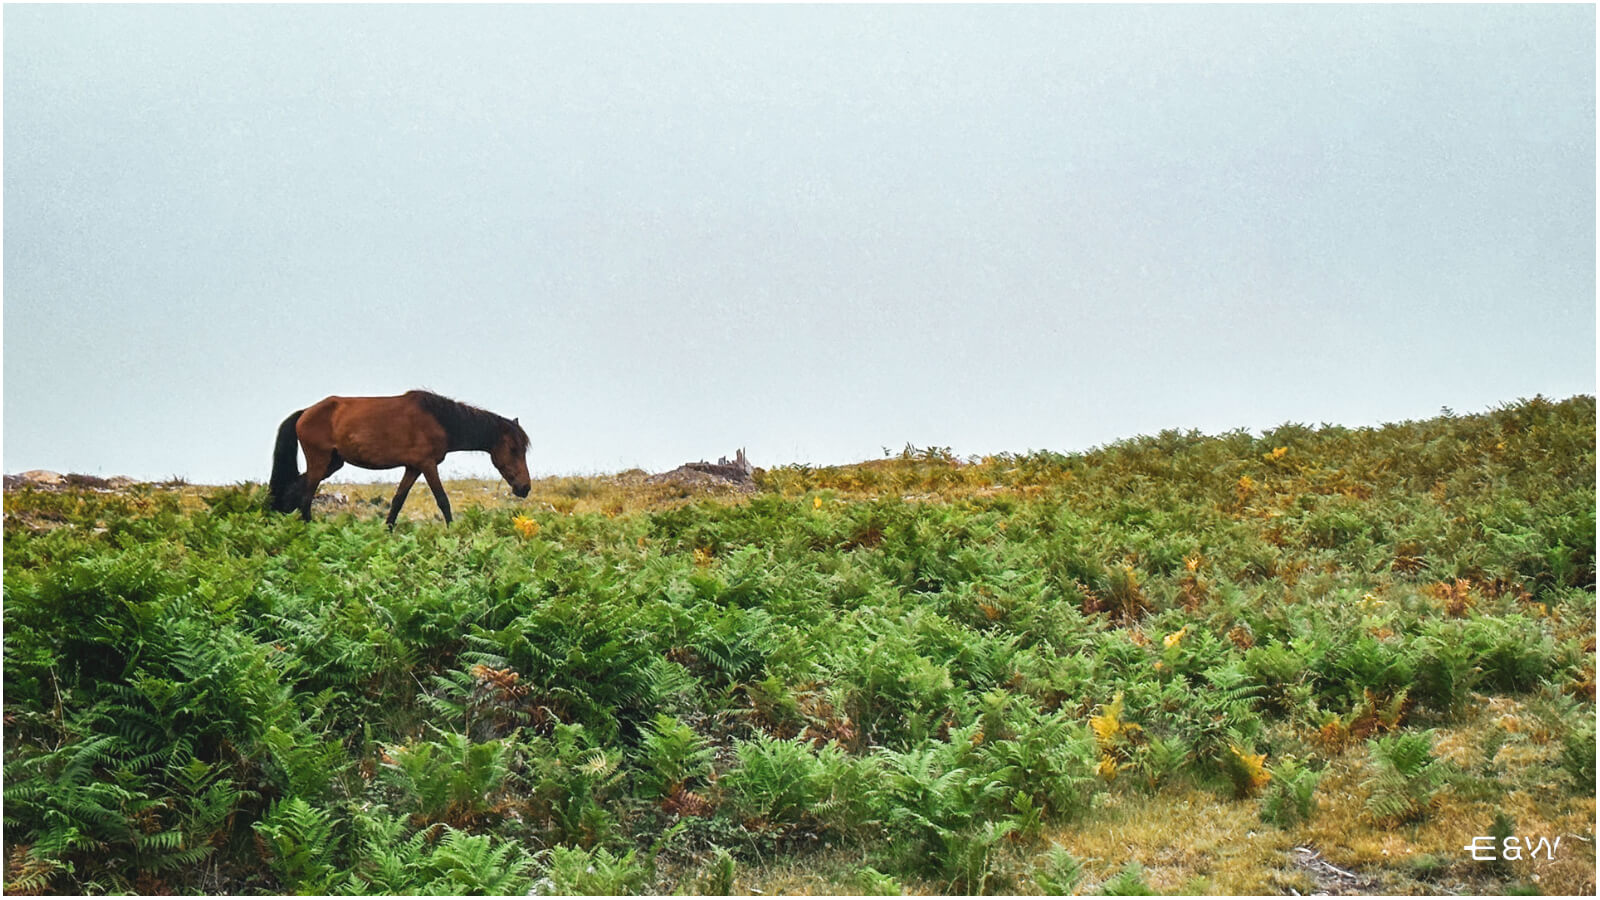 10 Best Things to do in Baiona, Galicia, Spain - 1. Wild Horses Safari on Monte A Groba